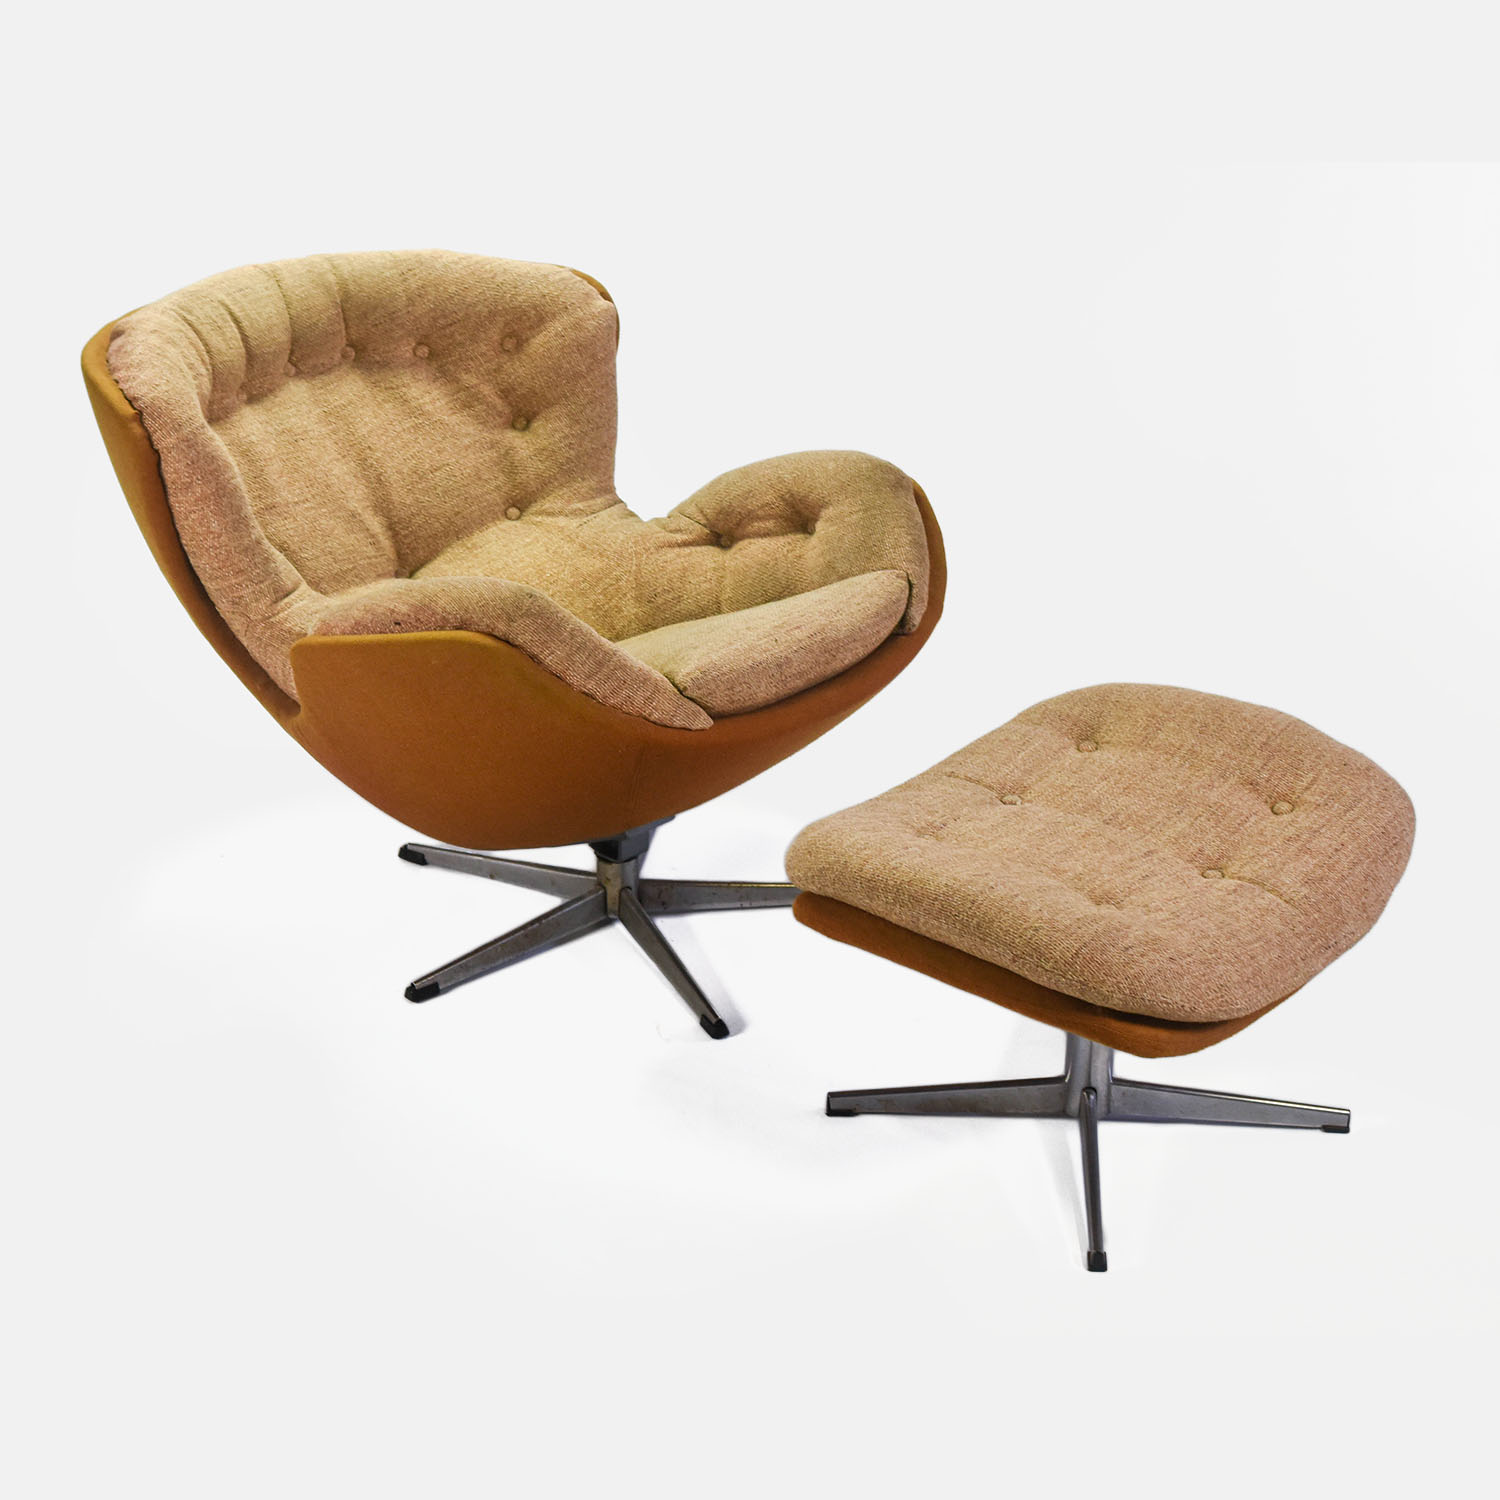 1960s MCM Upholstered Chair and Ottoman After Jacobsen's Egg